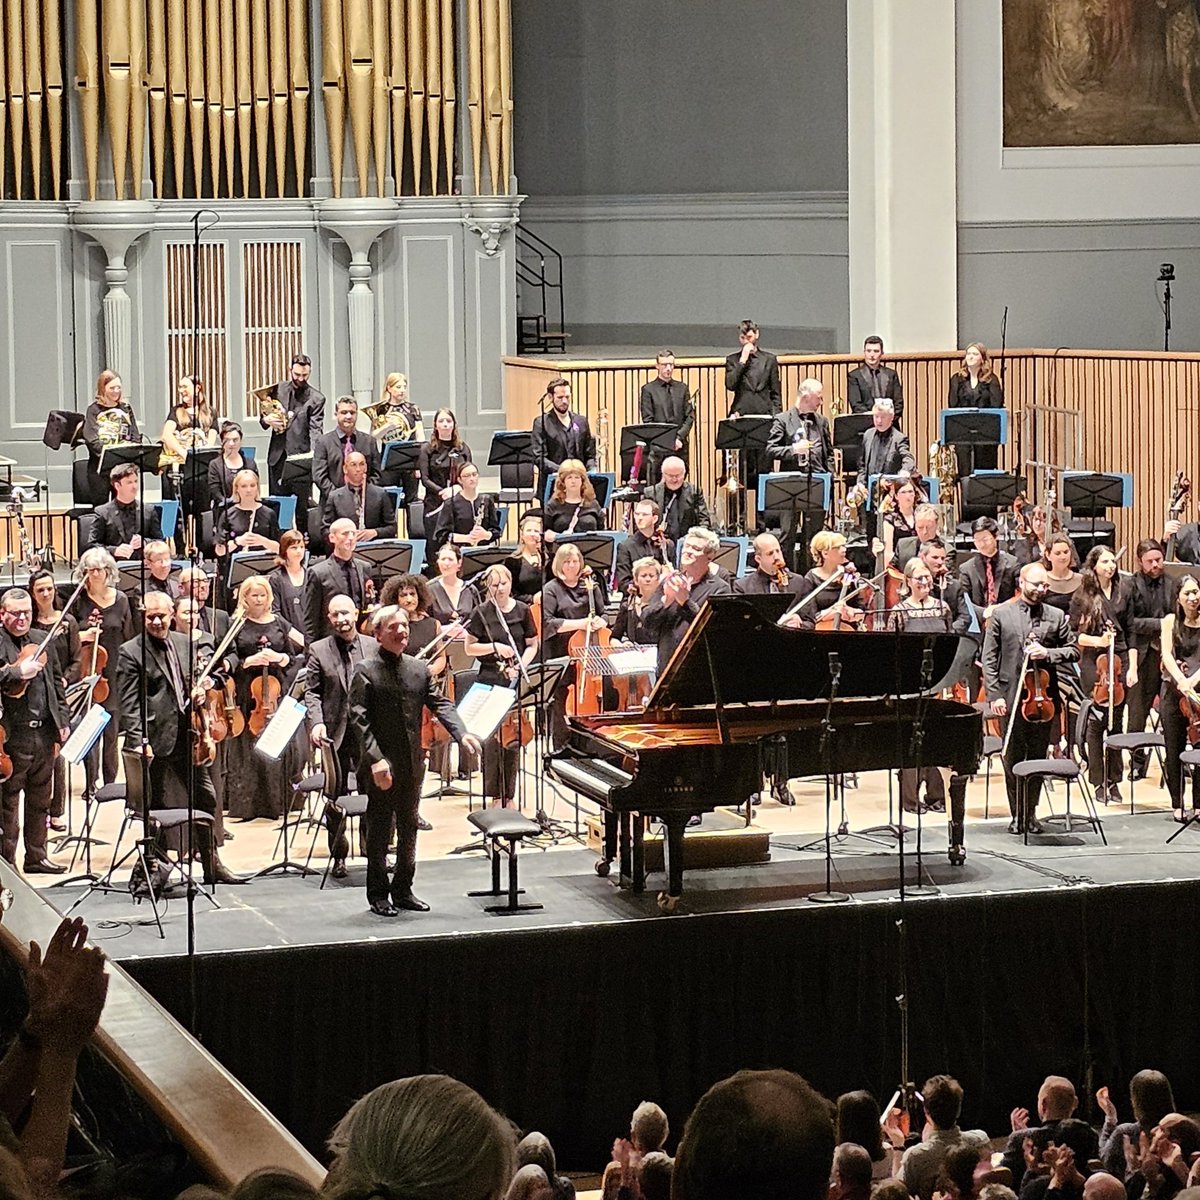 THANK YOU ABERDEEN! What an enchanting evening!🤩 Audiences experienced a dazzling performance of Rachmaninov's 'Rhapsody on a Theme of Paganini' with @houghhough, plus two fairy tale ballet scores from Tchaikovsky & Stravinsky with Chief Conductor Ryan Wigglesworth ✨